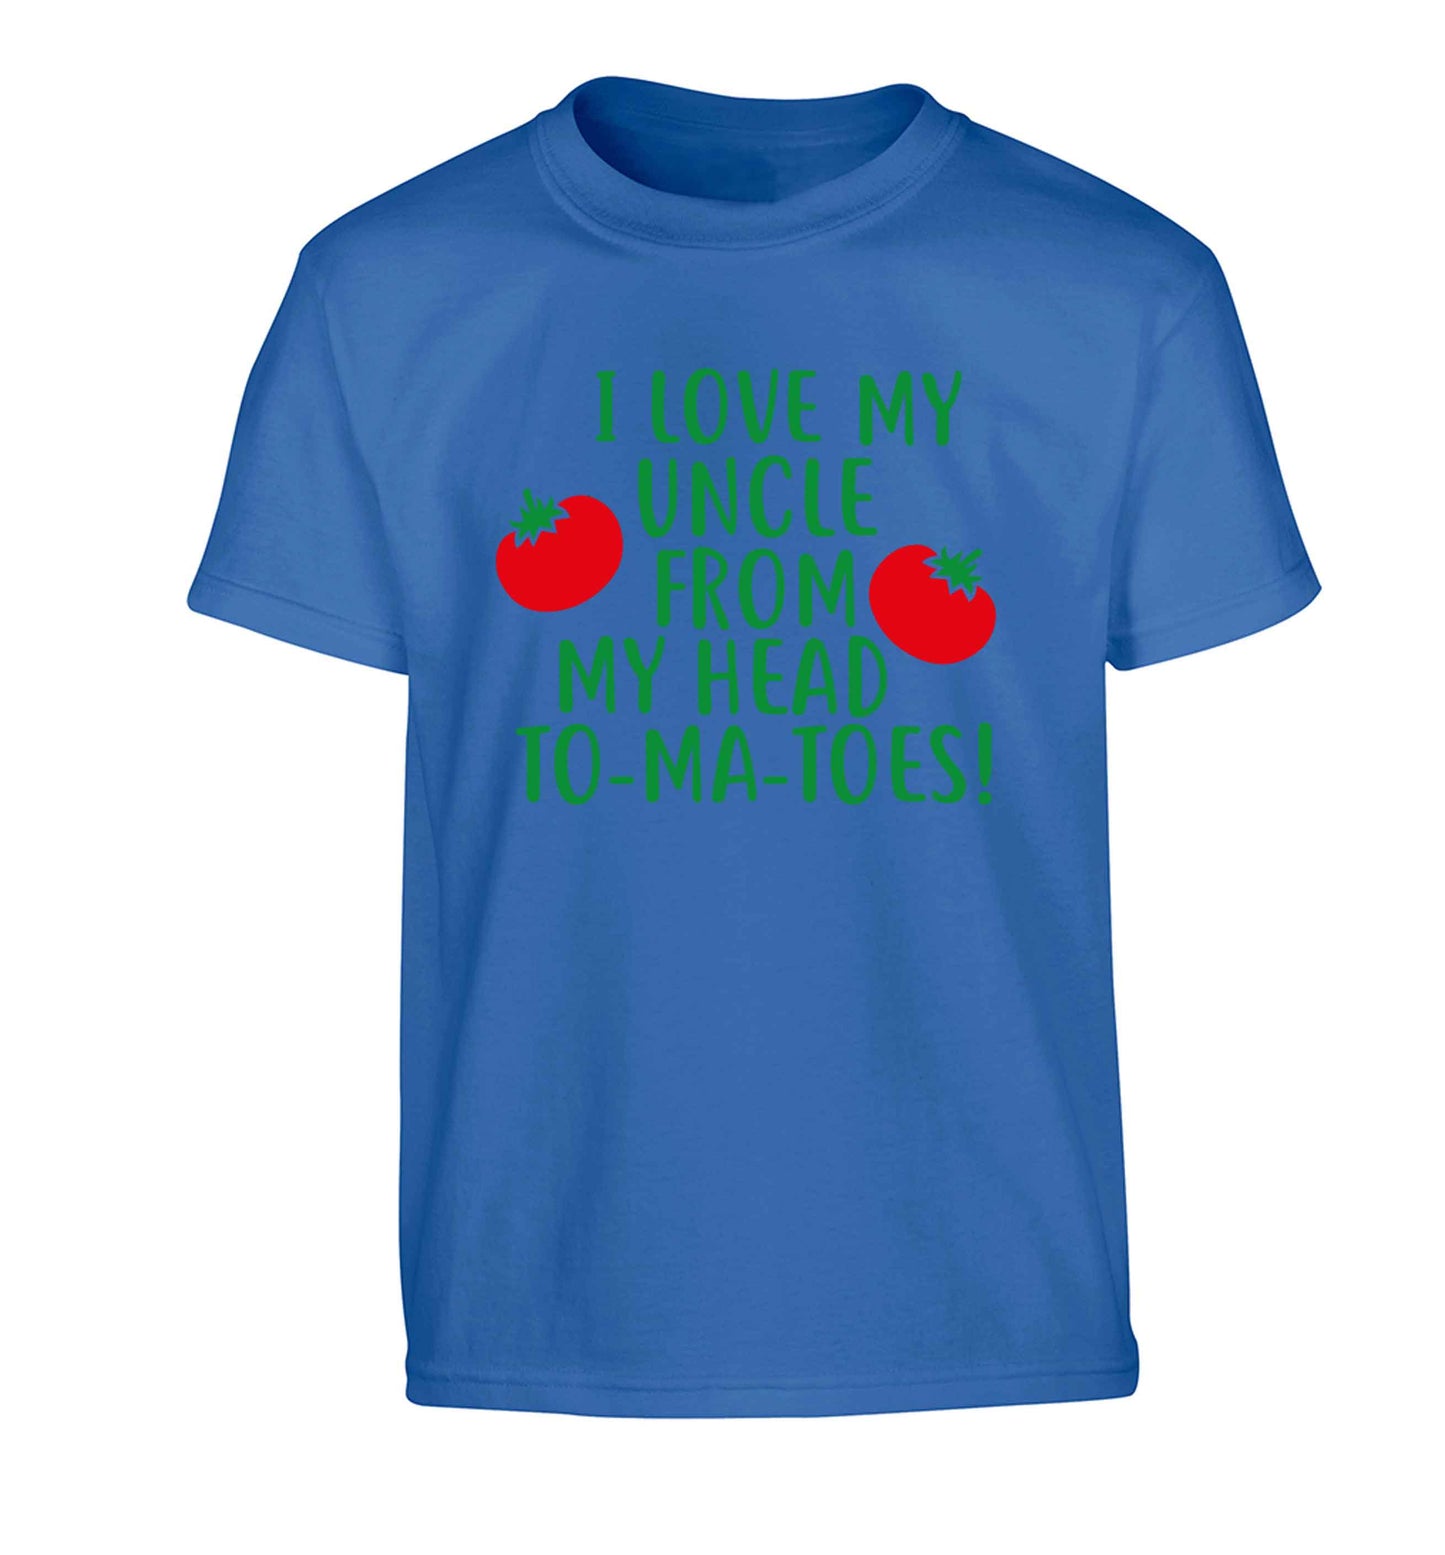 I love my uncle from my head To-Ma-Toes Children's blue Tshirt 12-13 Years